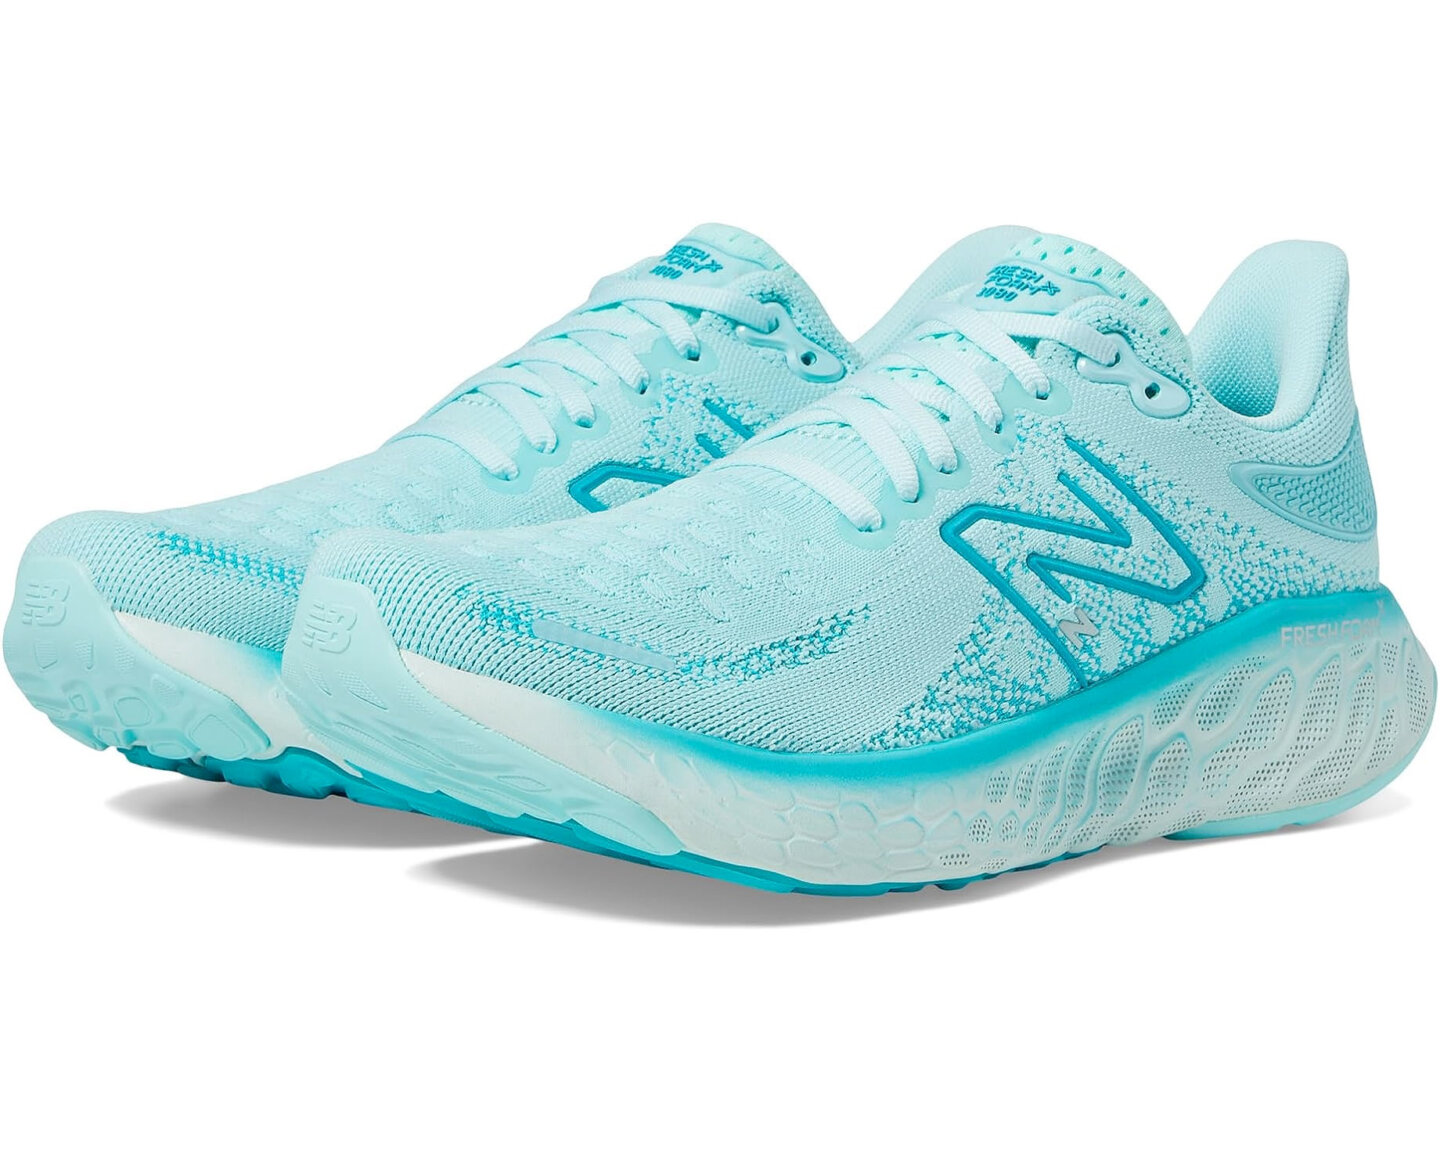 Upgrade Your Run: New Balance Fresh Foam X 1080v12 Now in Stock at Zappos